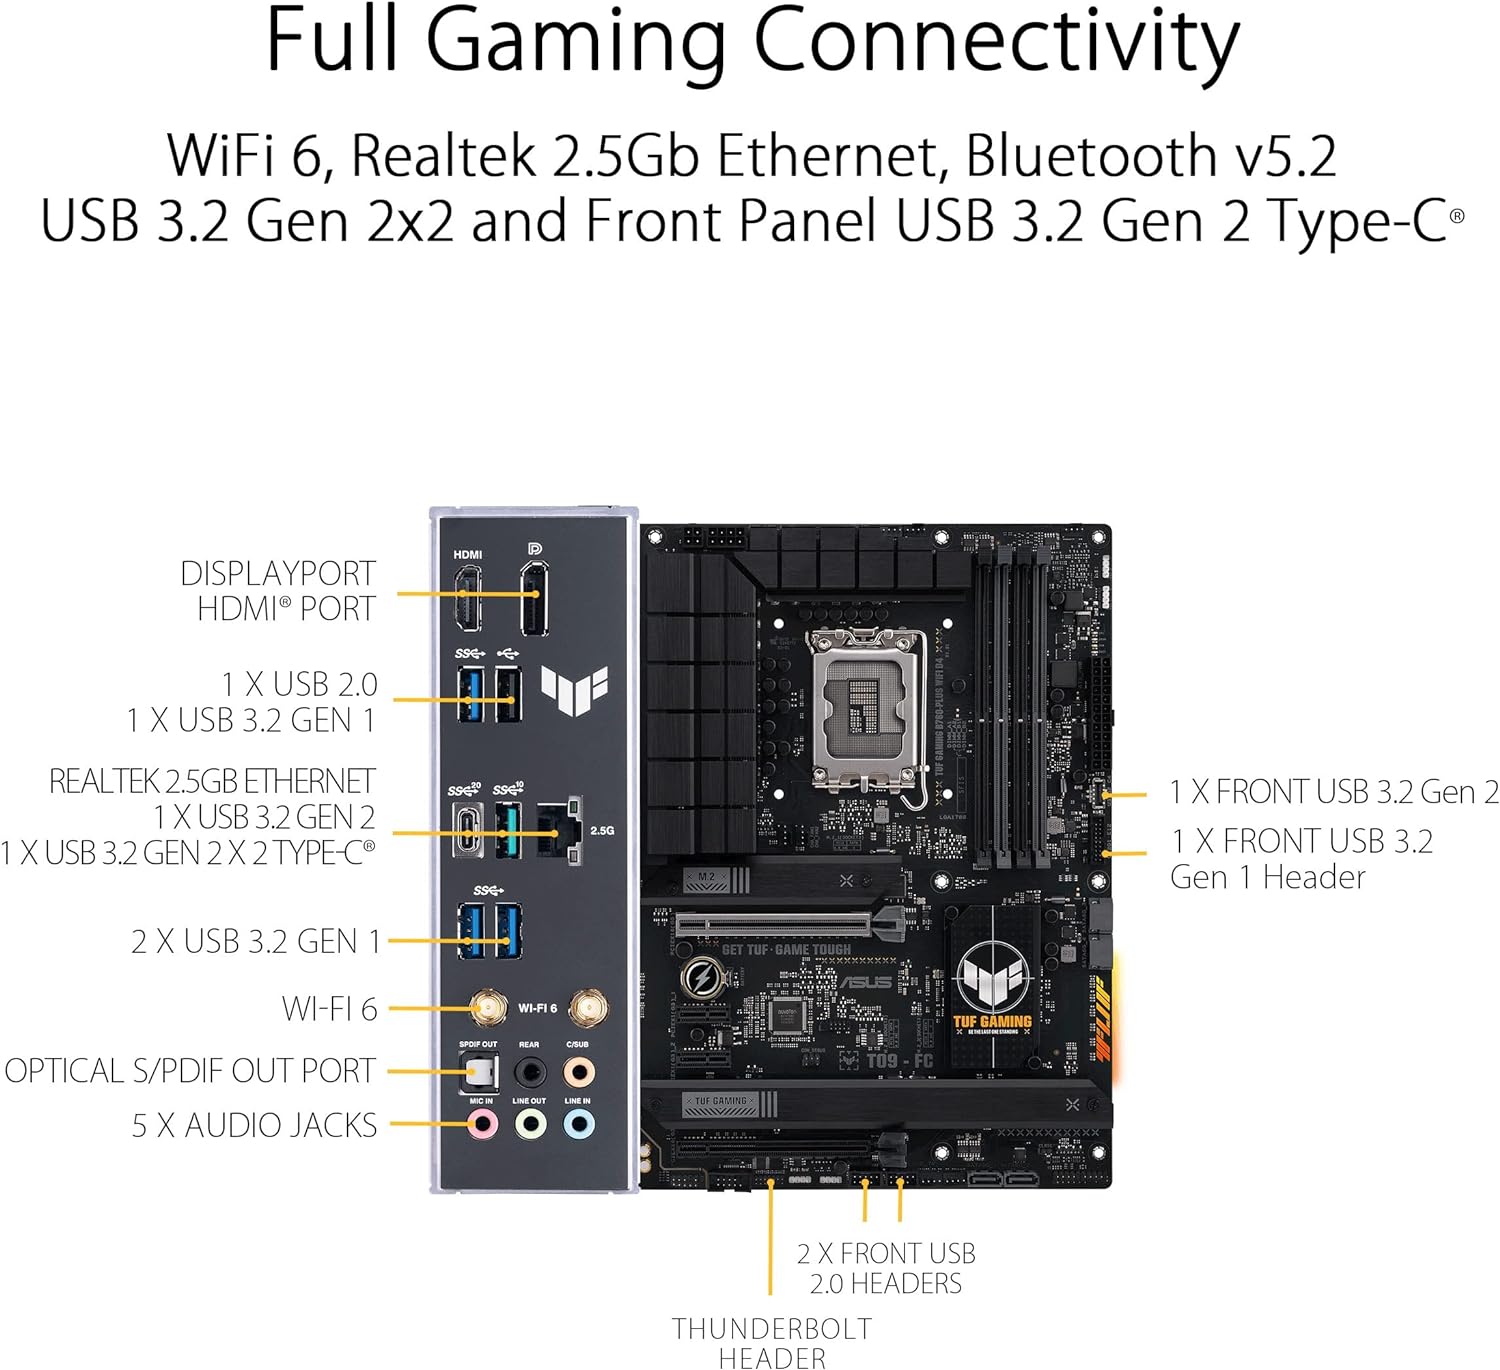 Cutting-edge connectivity with PCIe 5.0 slot and USB 3.2 Gen 2x2 Type-C 0197105009493